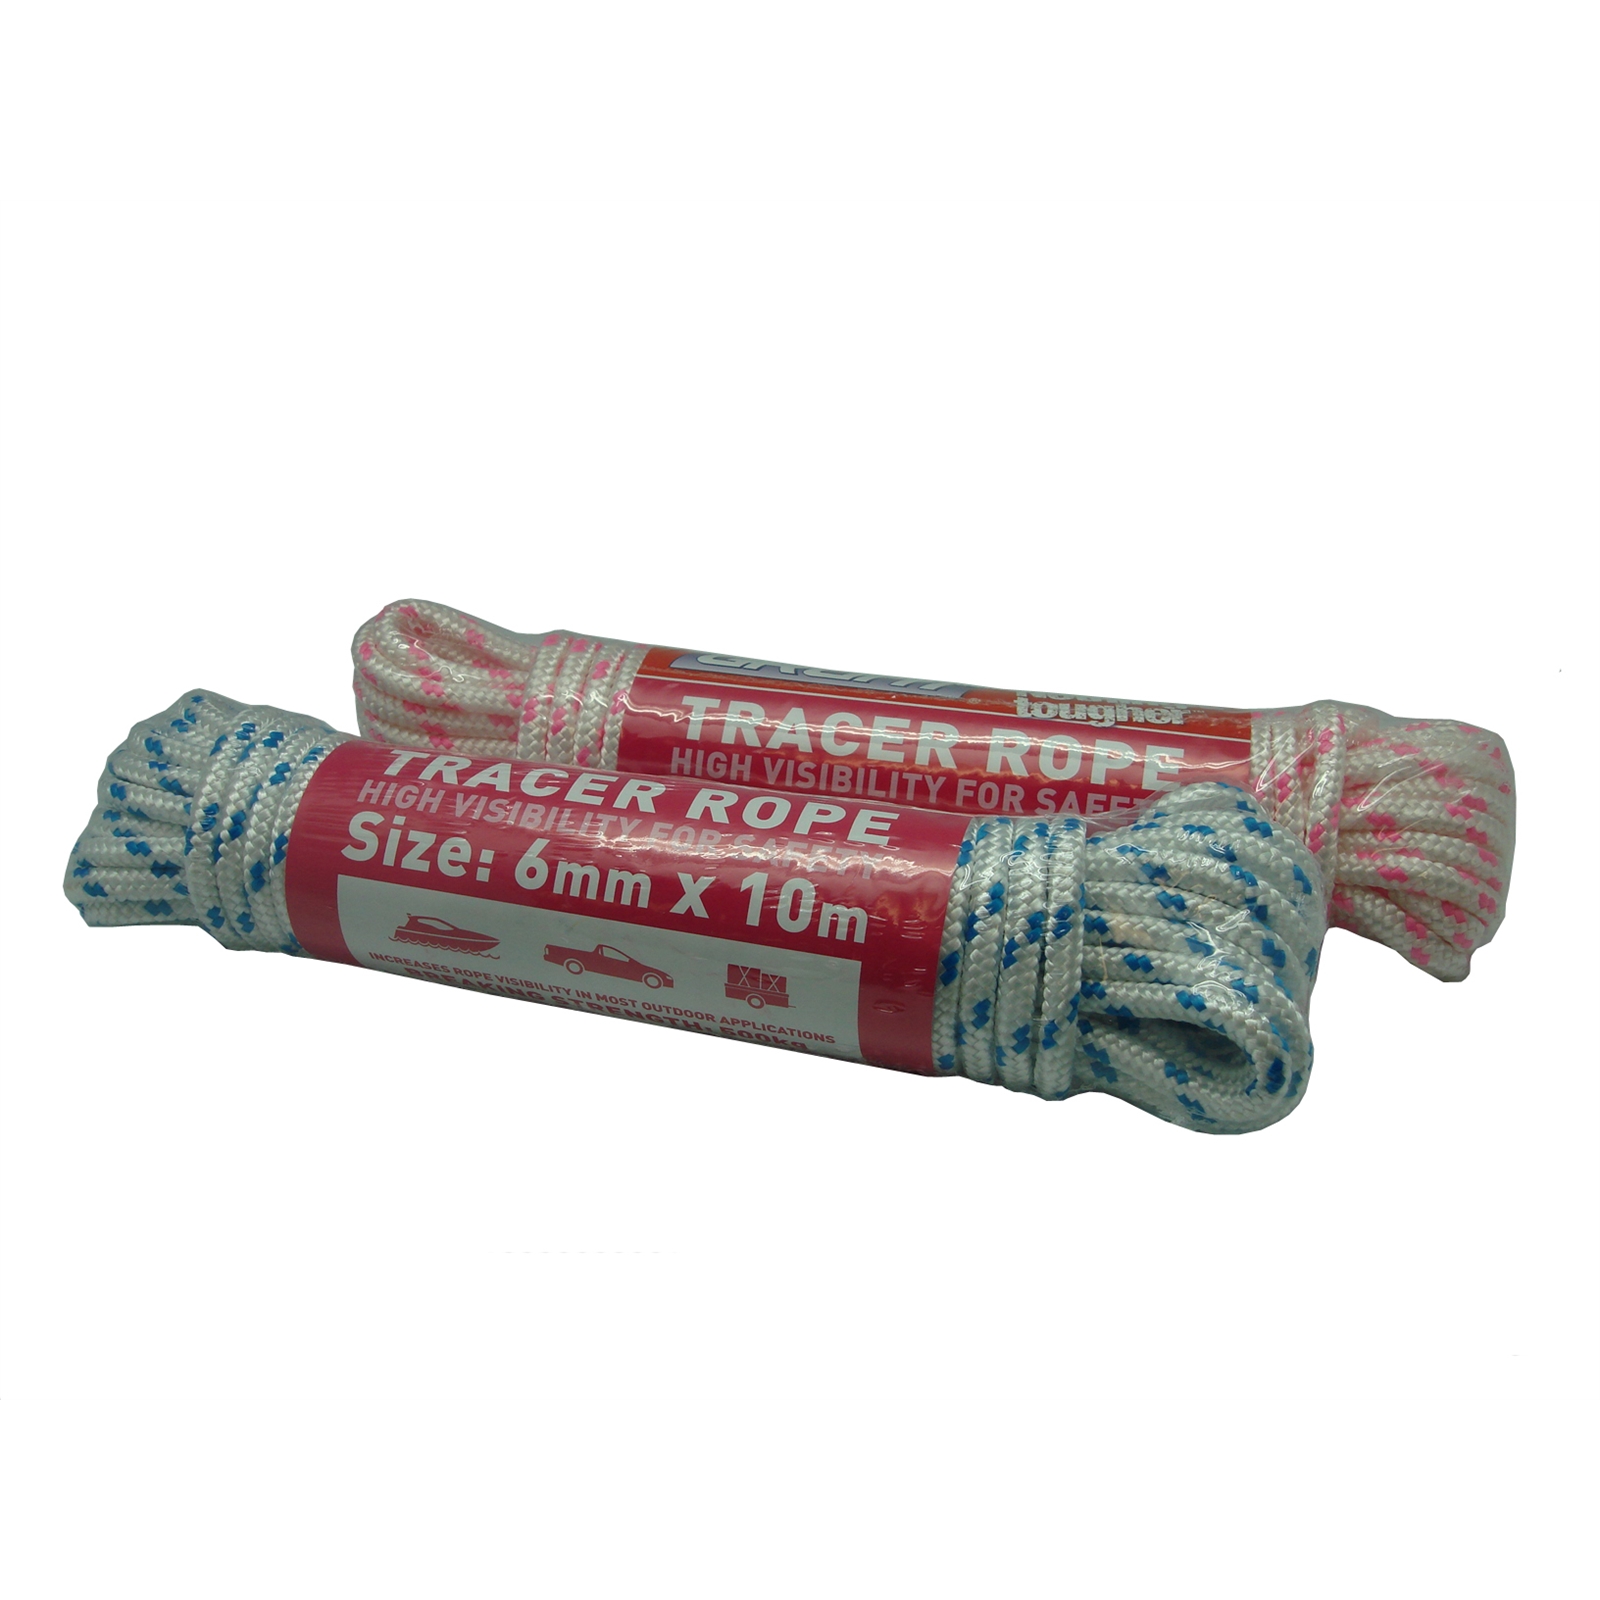 Grunt 6mm x 10m White With Pink / Blue Tracer Rope